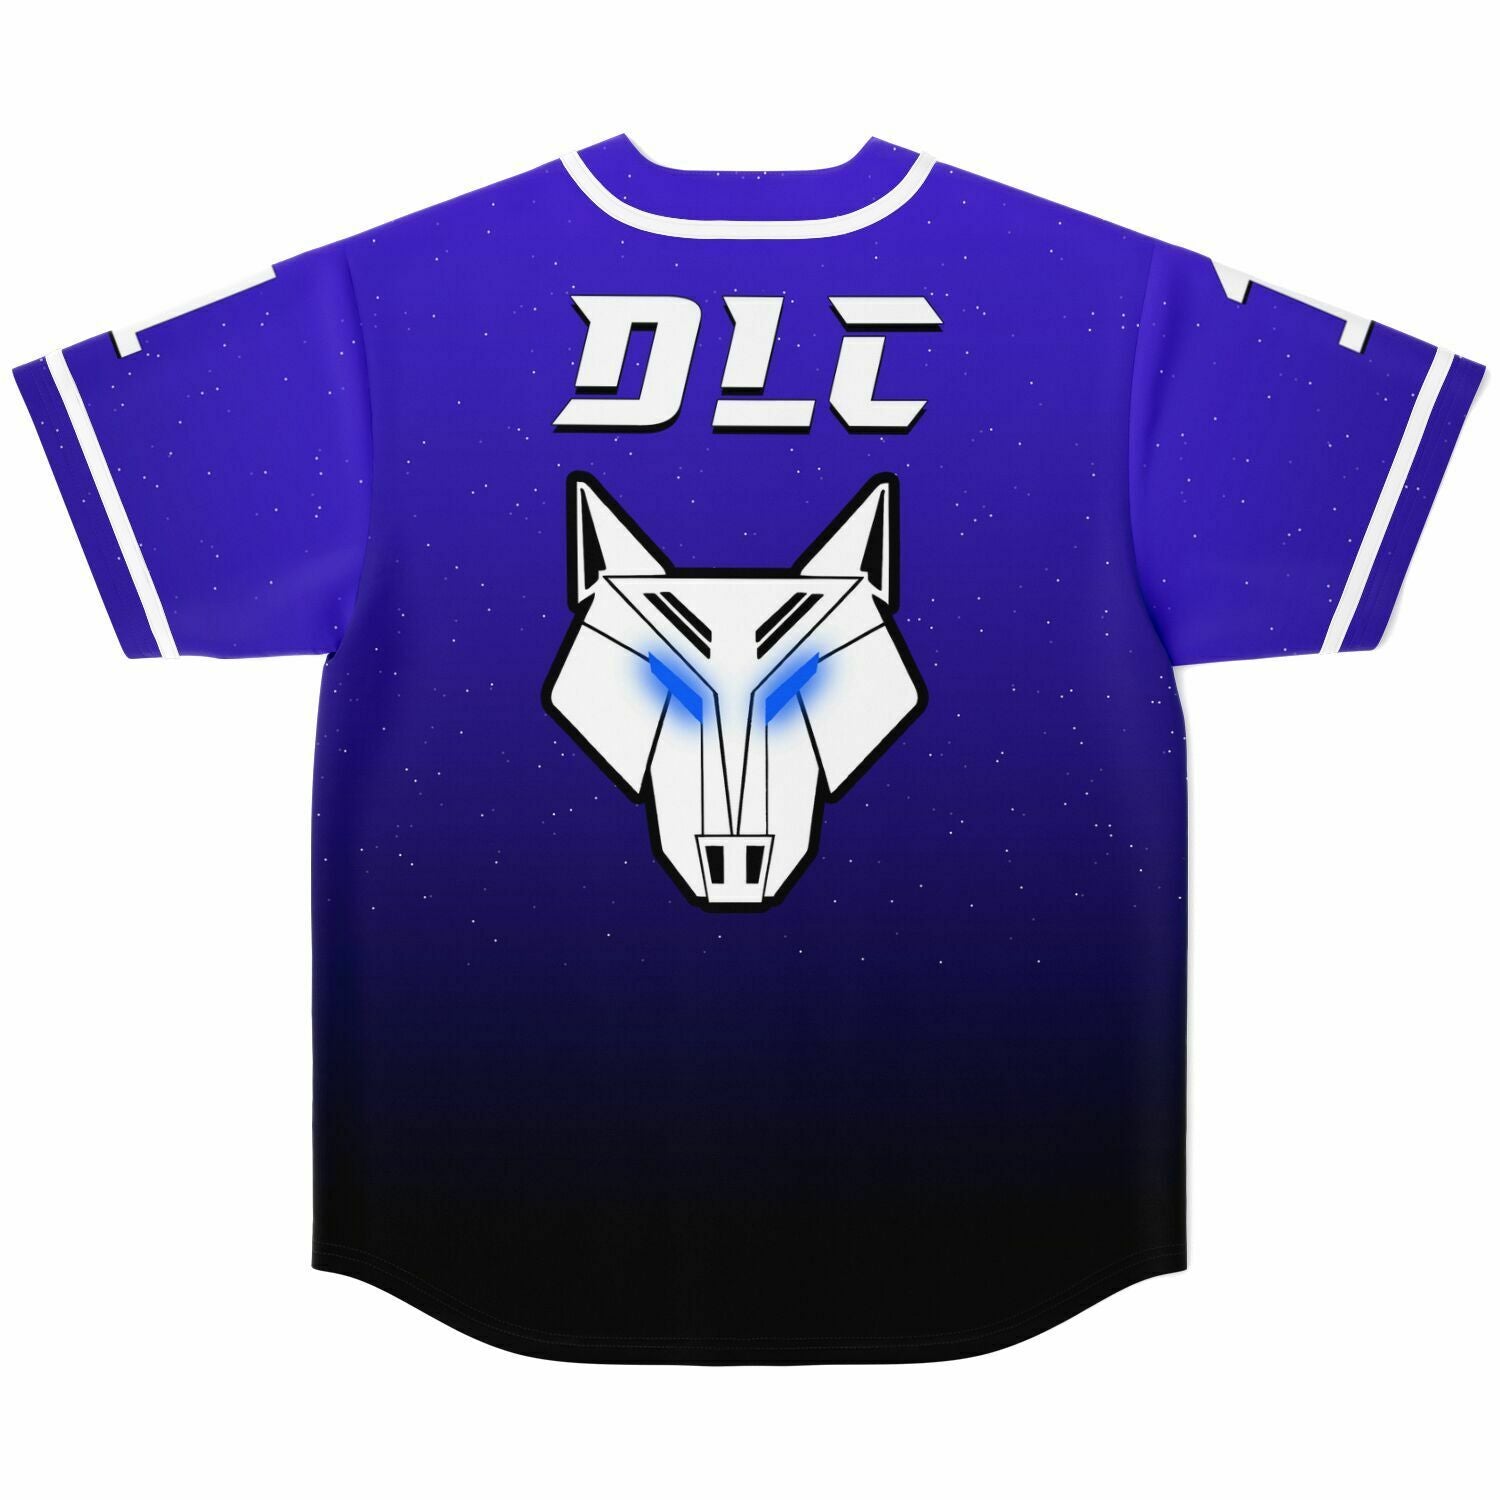 A purple Raul custom Baseball Jersey with an image of a wolf on it.